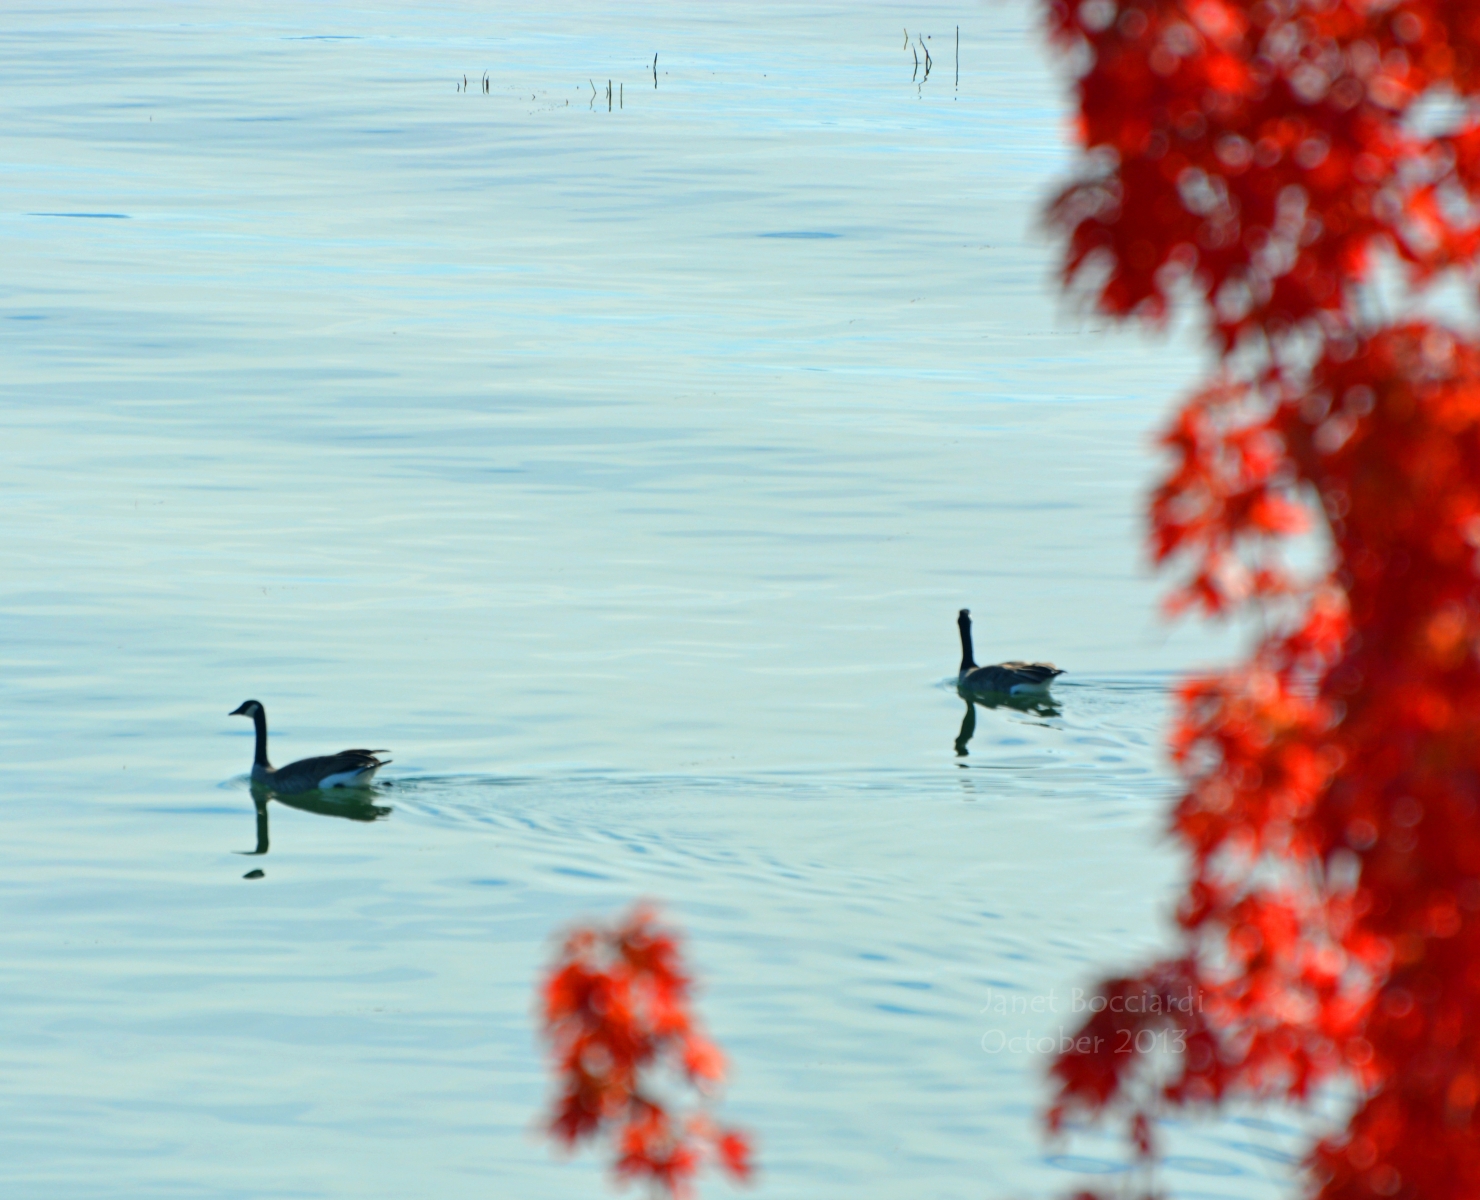 Geese on lake in Autumn.